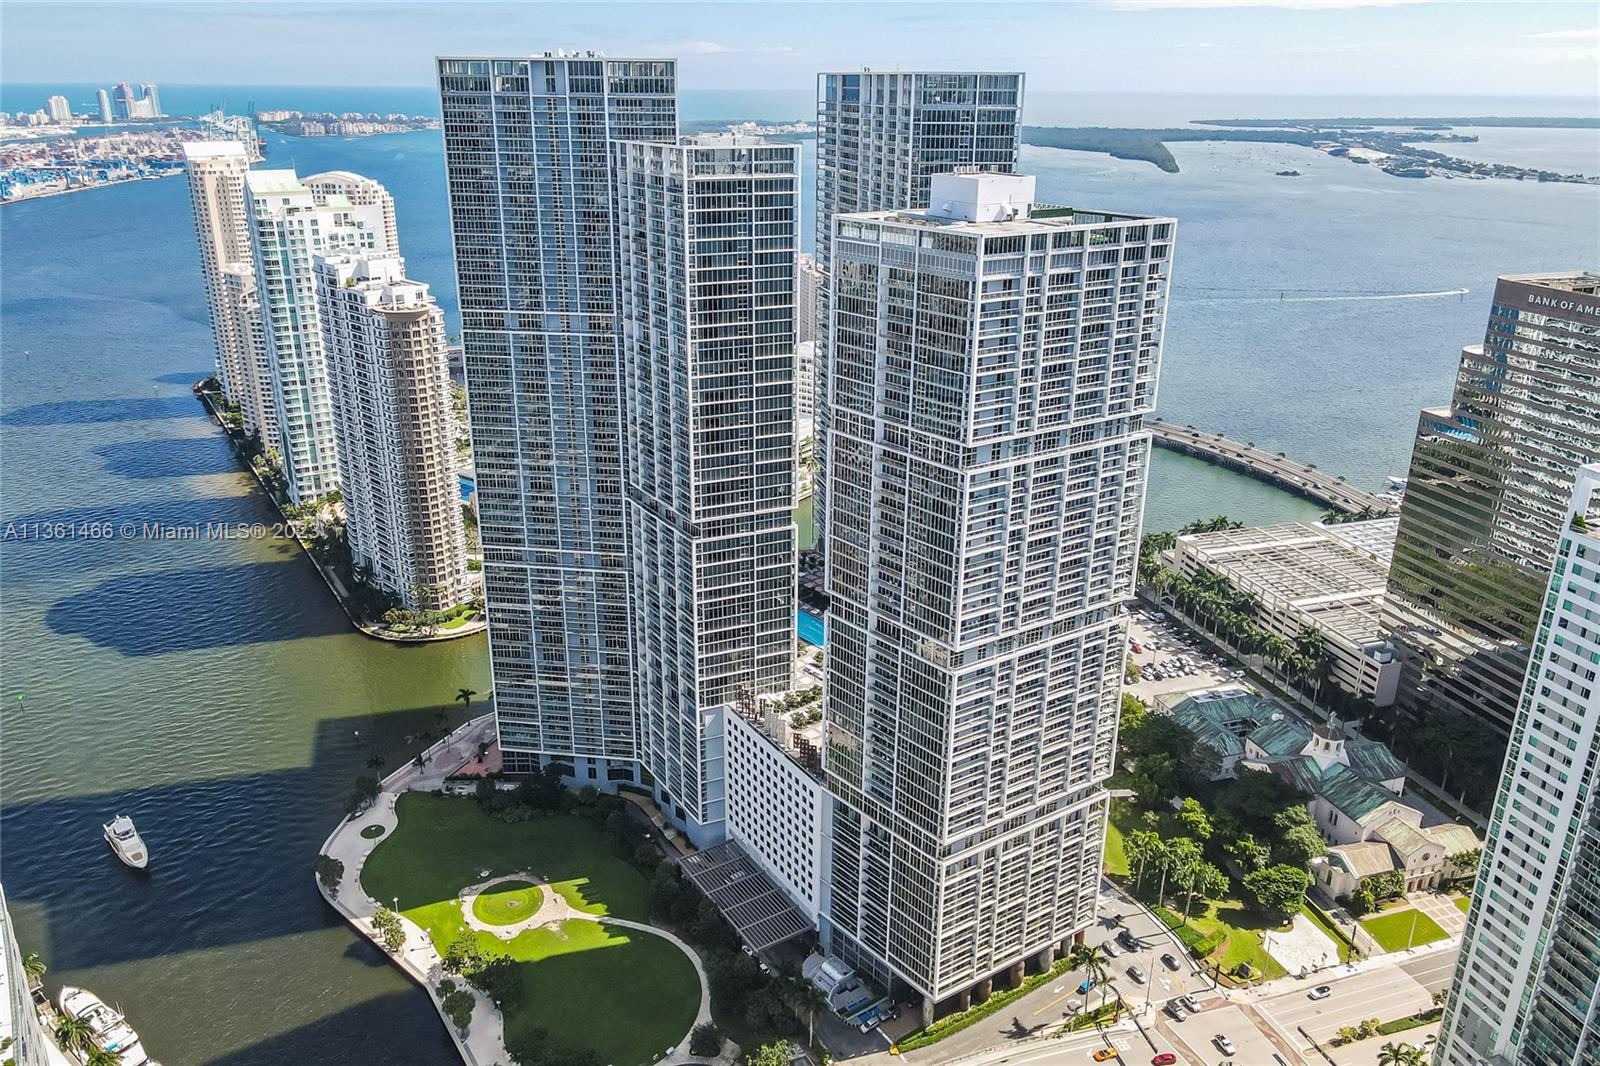 Stunning, well kept Penthouse in the famous ICON Brickell. This unit features top of the line appliances and finishes along with a breath taking view of the bay. Step into this penthouse unit with wrap around balcony and enjoy the peace and quiet that comes with being in one of the highest floors. Perfect for anyone wanting to downgrade to a condo from a house, or use this as a second home and rent it out short term for the extra income.